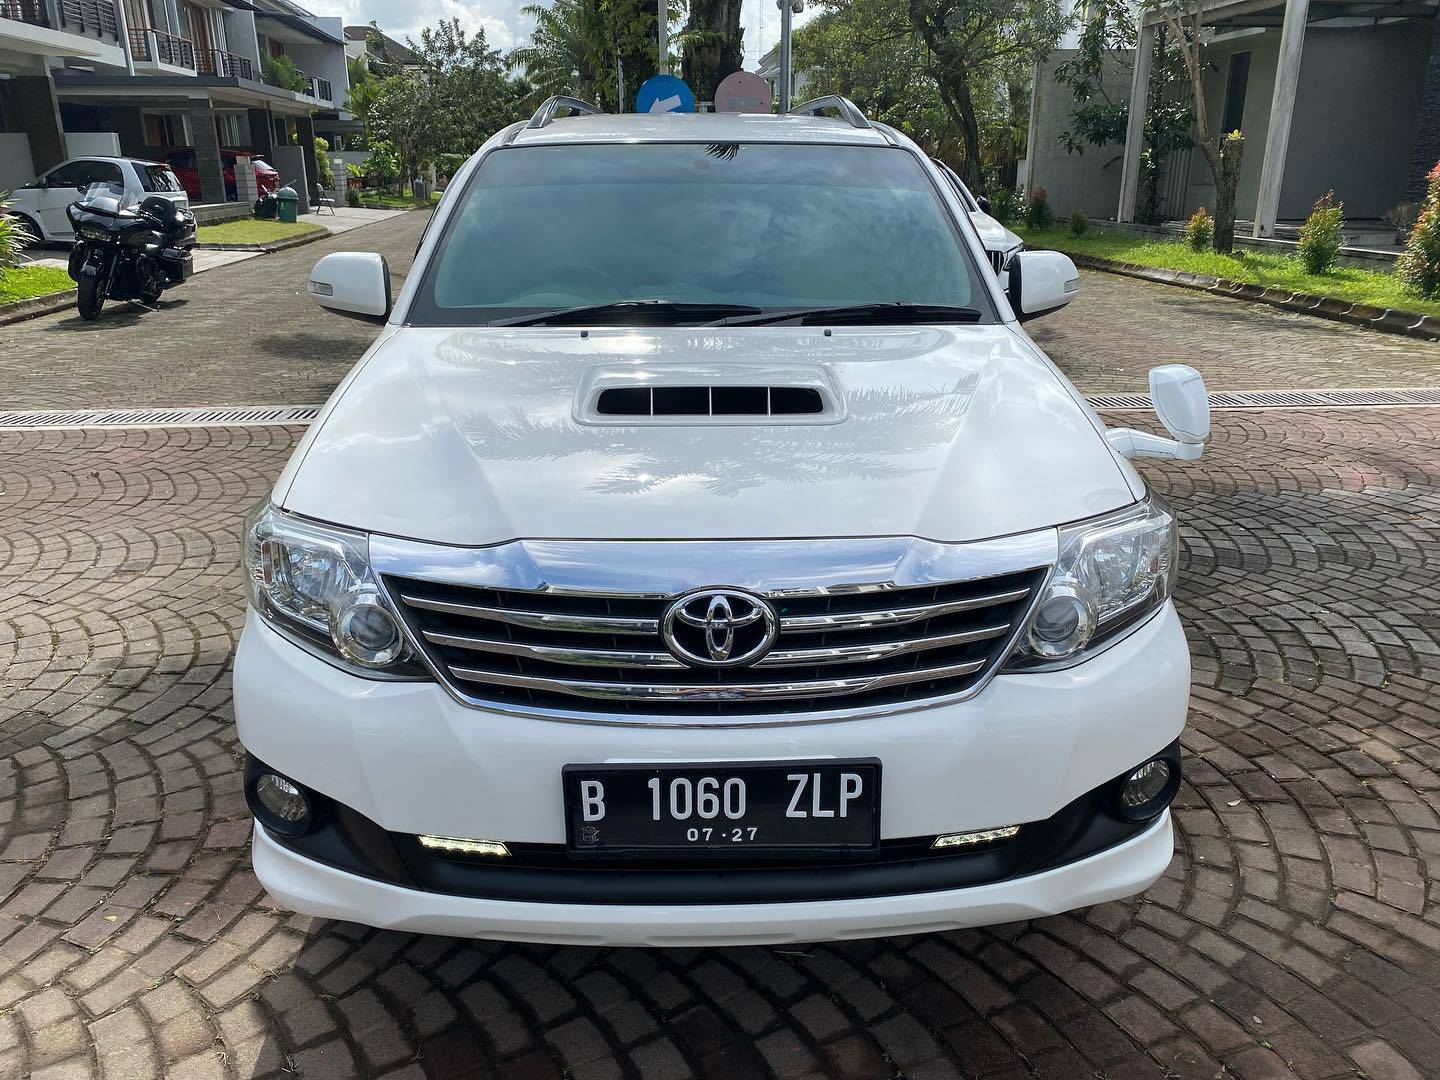 Second Hand 2013 Toyota Fortuner